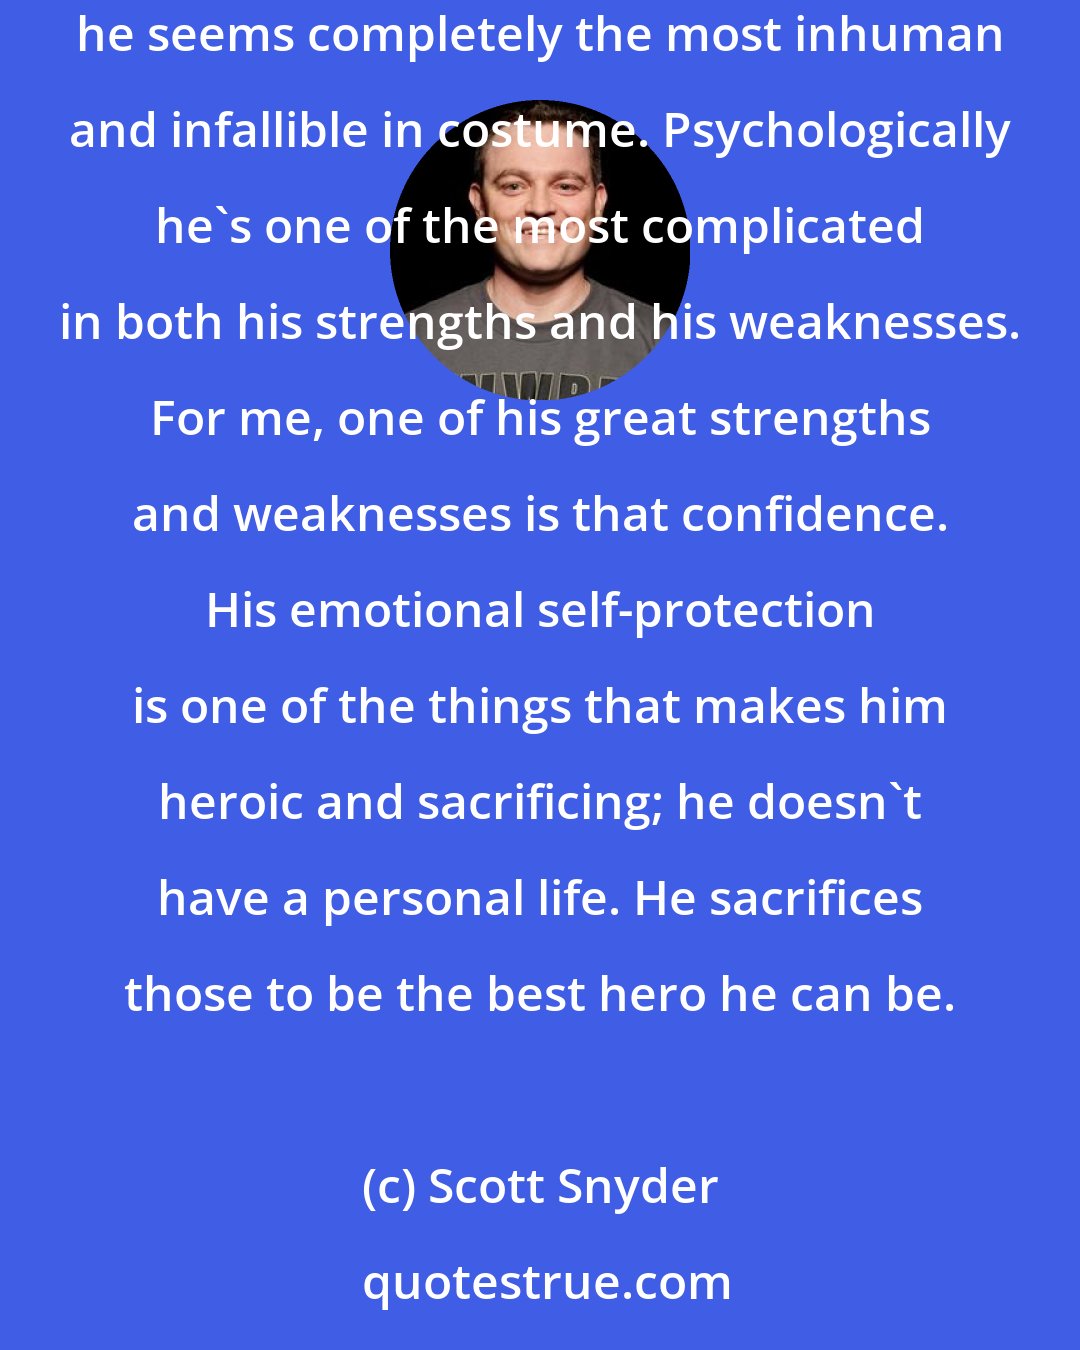 Scott Snyder: I think thing that makes Batman so endlessly interesting is that he's one of the most flawed and deeply human characters, even though he seems completely the most inhuman and infallible in costume. Psychologically he's one of the most complicated in both his strengths and his weaknesses. For me, one of his great strengths and weaknesses is that confidence. His emotional self-protection is one of the things that makes him heroic and sacrificing; he doesn't have a personal life. He sacrifices those to be the best hero he can be.